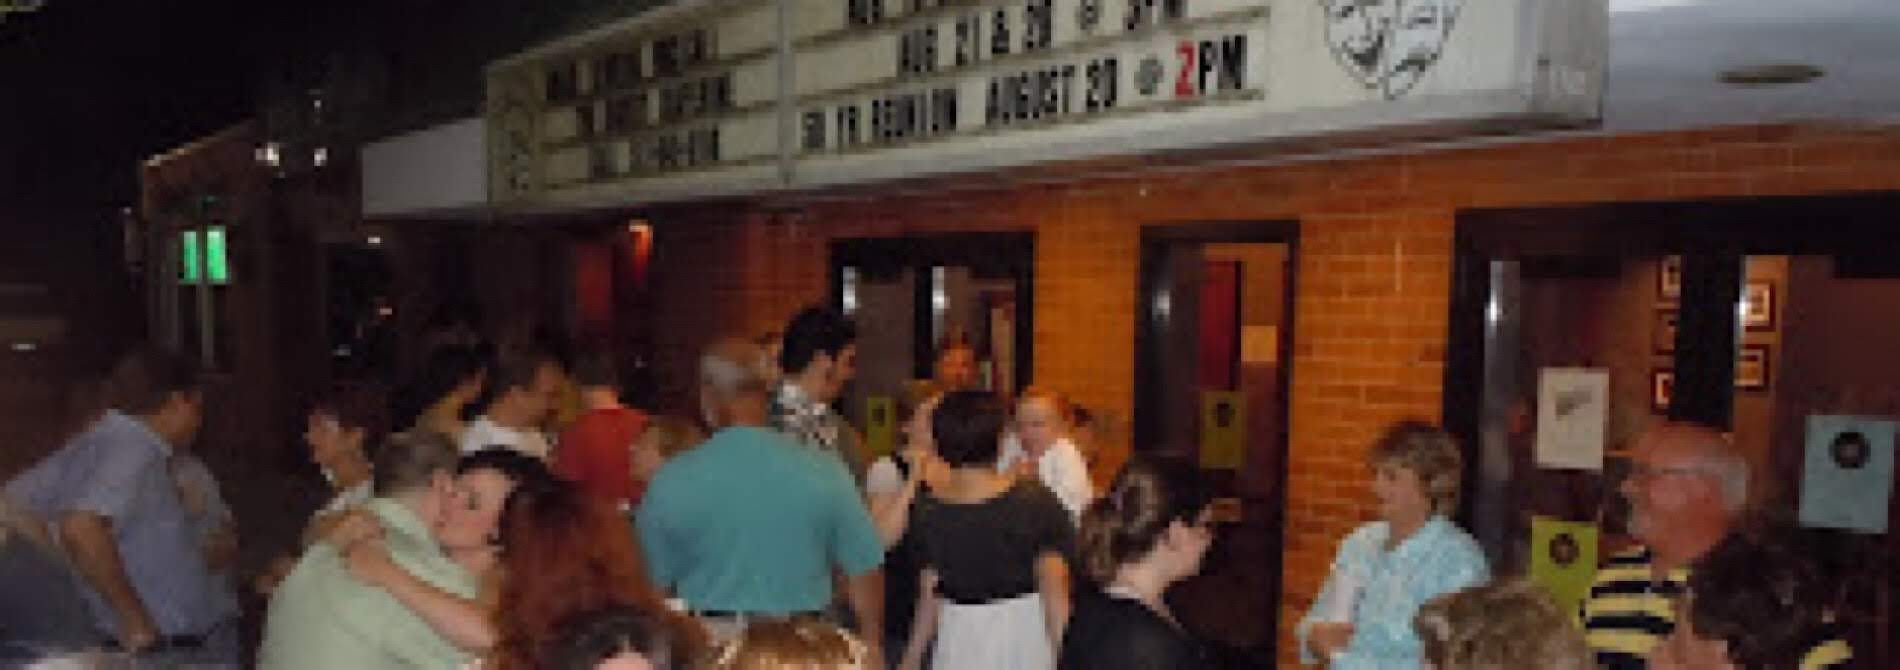 crowd gathering outside theater with marquee